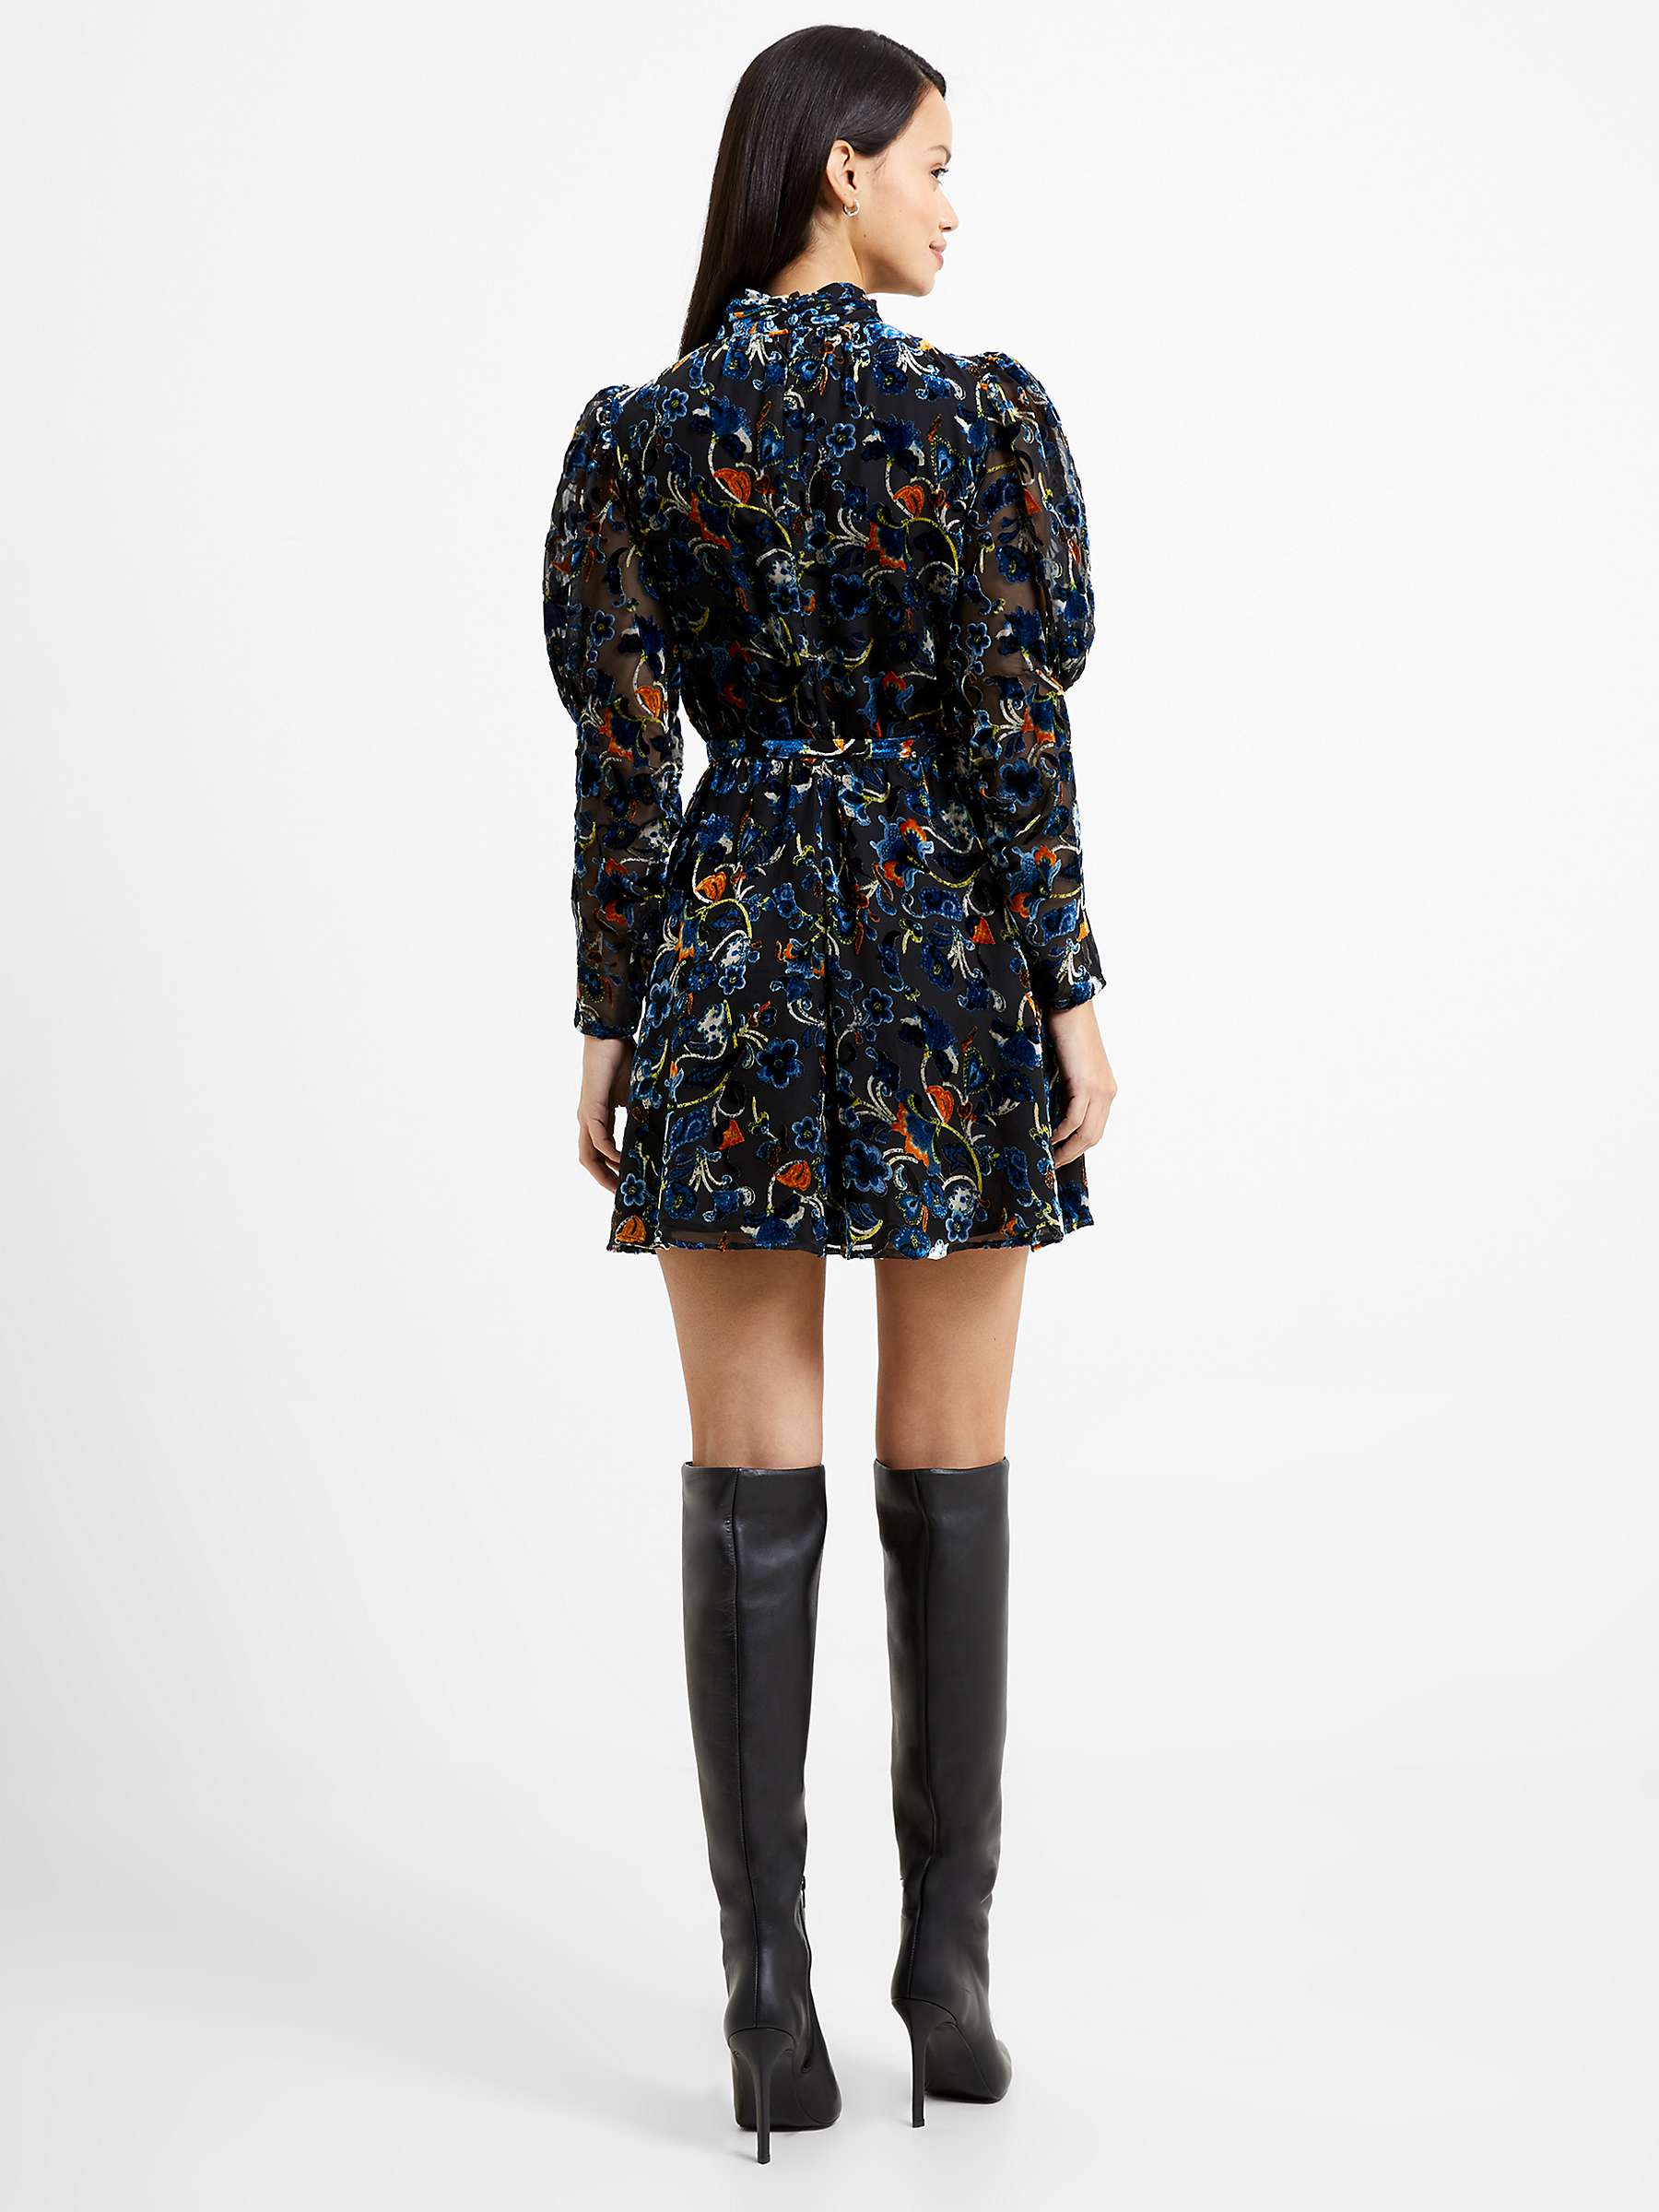 Buy French Connection Avery Burnout Floral Mini Dress, Blackout Online at johnlewis.com